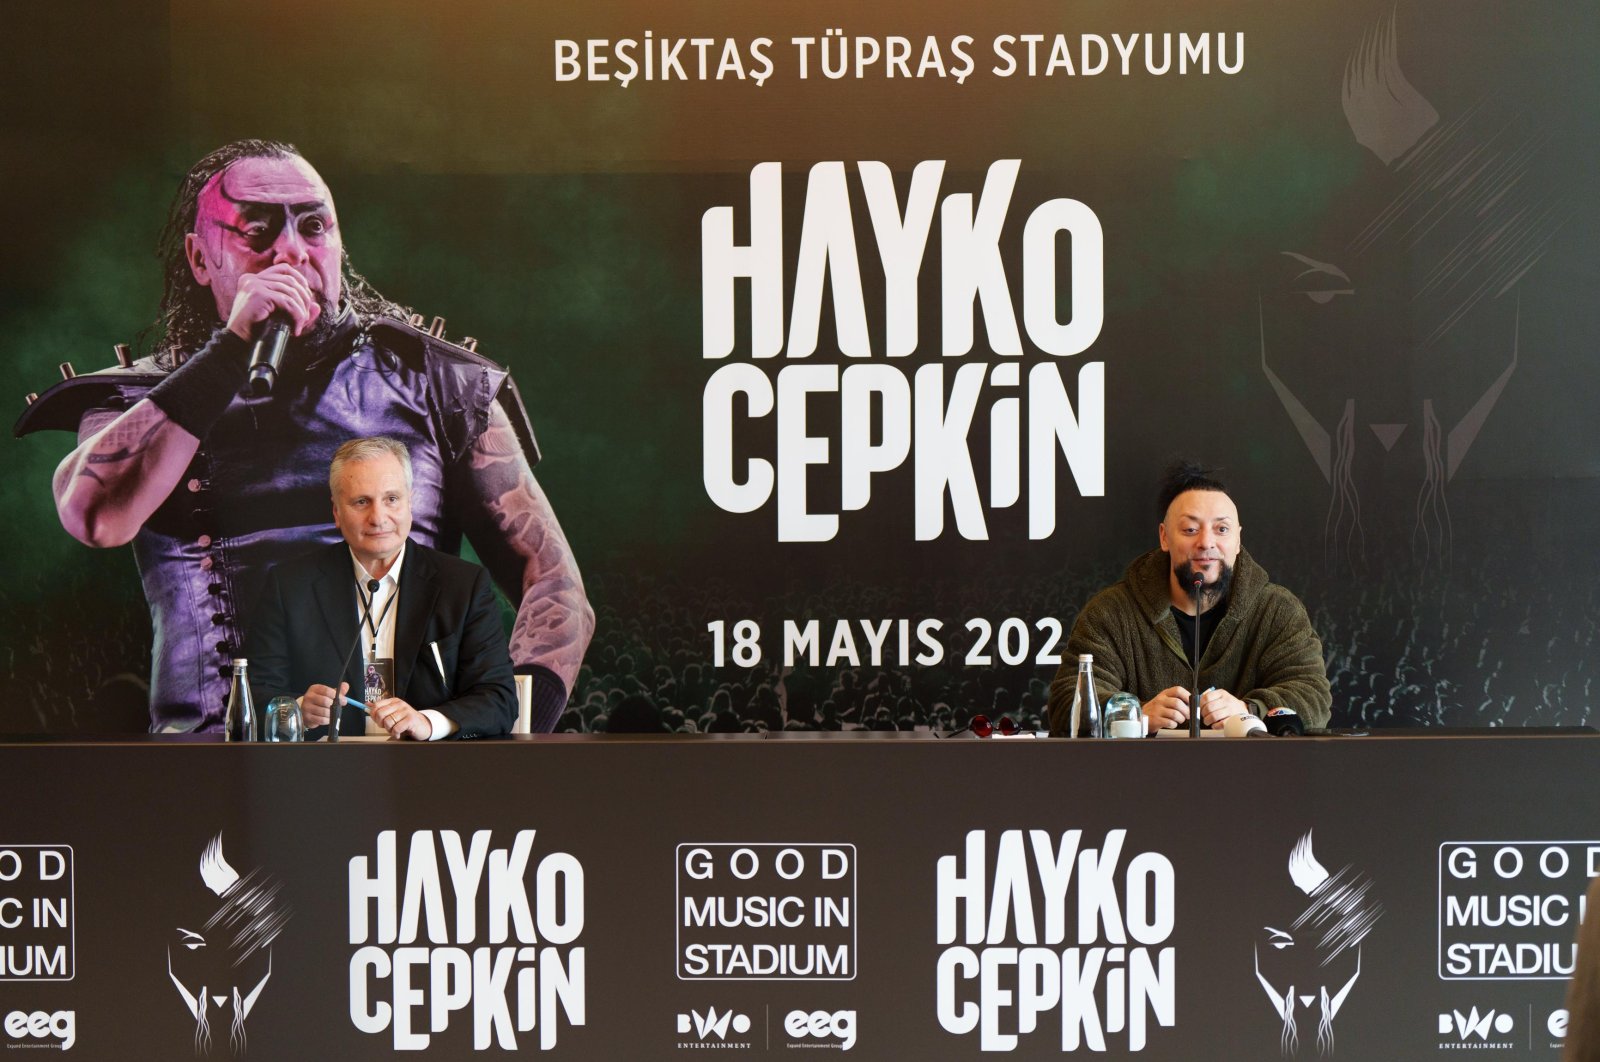 The rock musician Hayko Cepkin explains the details of the &quot;Good Music in Stadium&quot; concert in a press conference, Istanbul, Türkiye, Dec. 12, 2023. (Photo courtesy of BWO Entertainment)